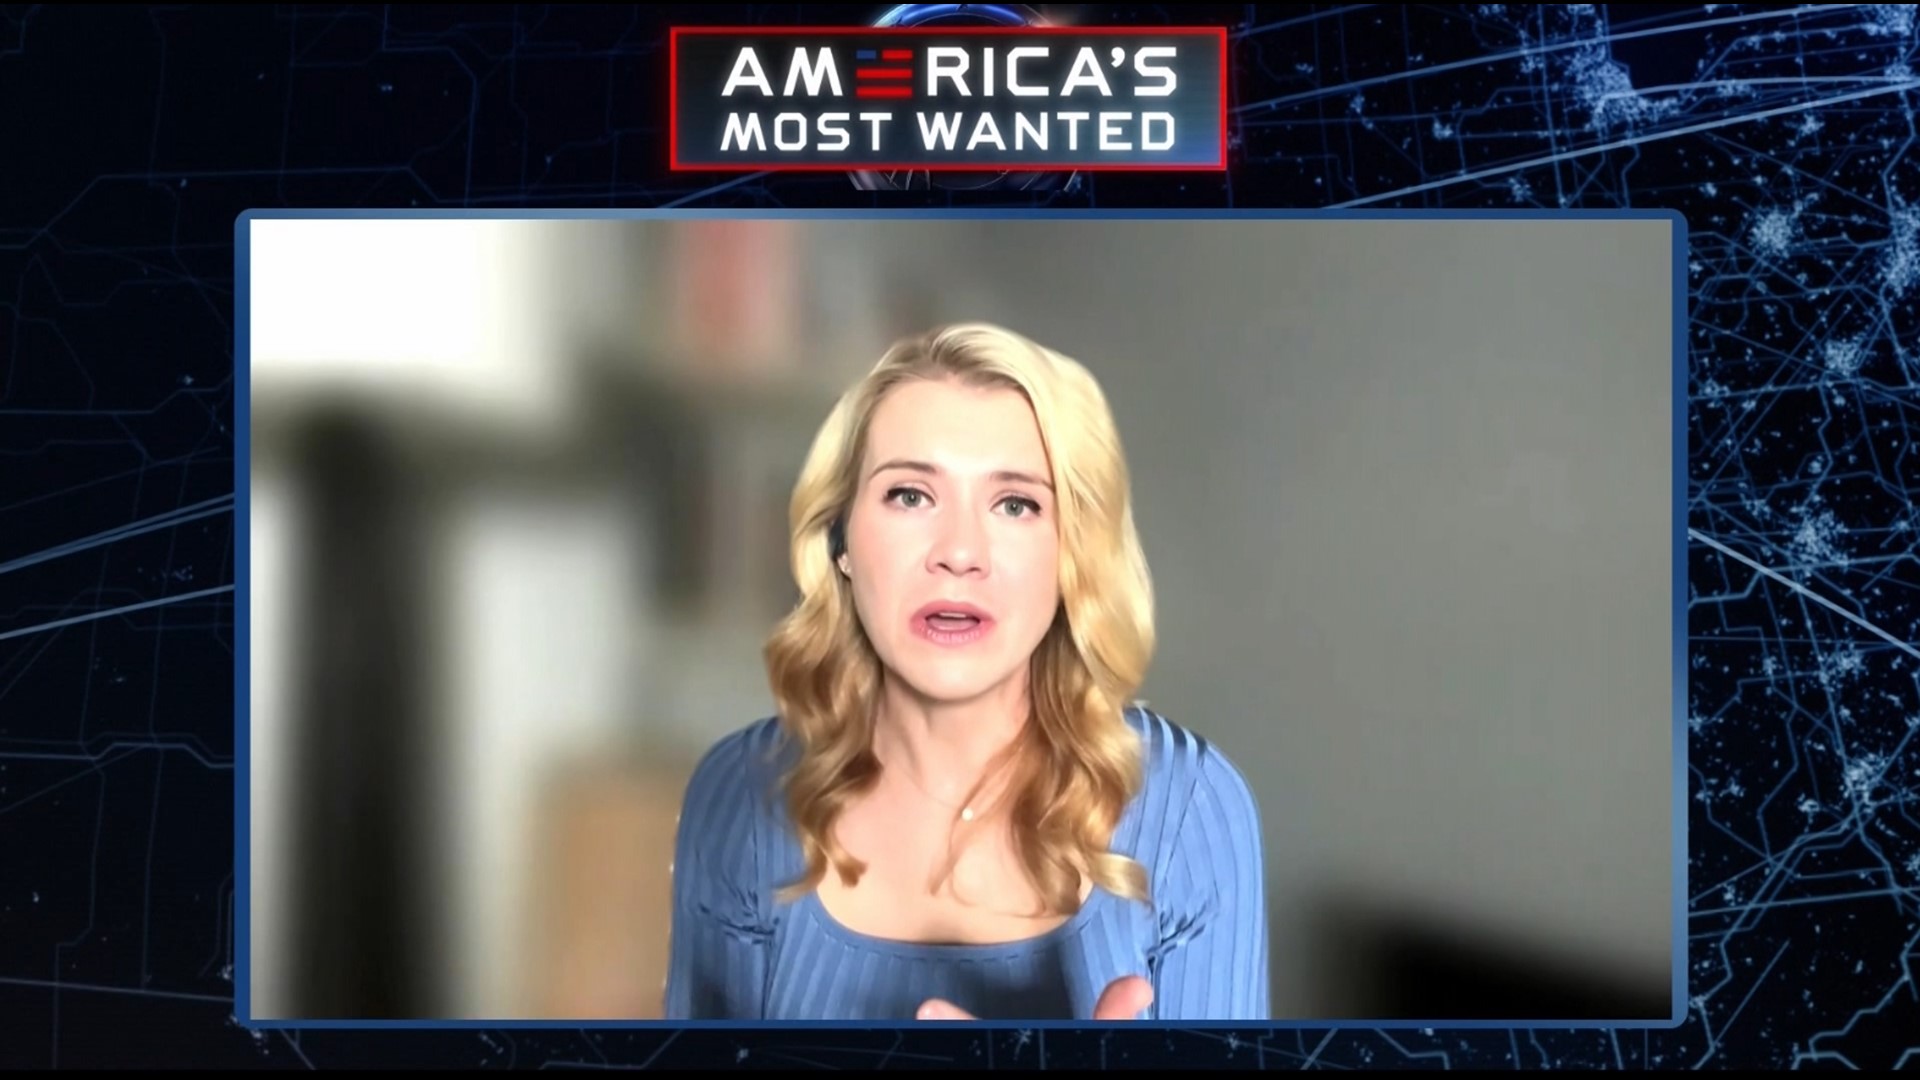 Elizabeth Smart, the survivor of one of the most followed U.S. child abduction cases, spoke to FOX61 about her story appearing on FOX's "America's Most Wanted."